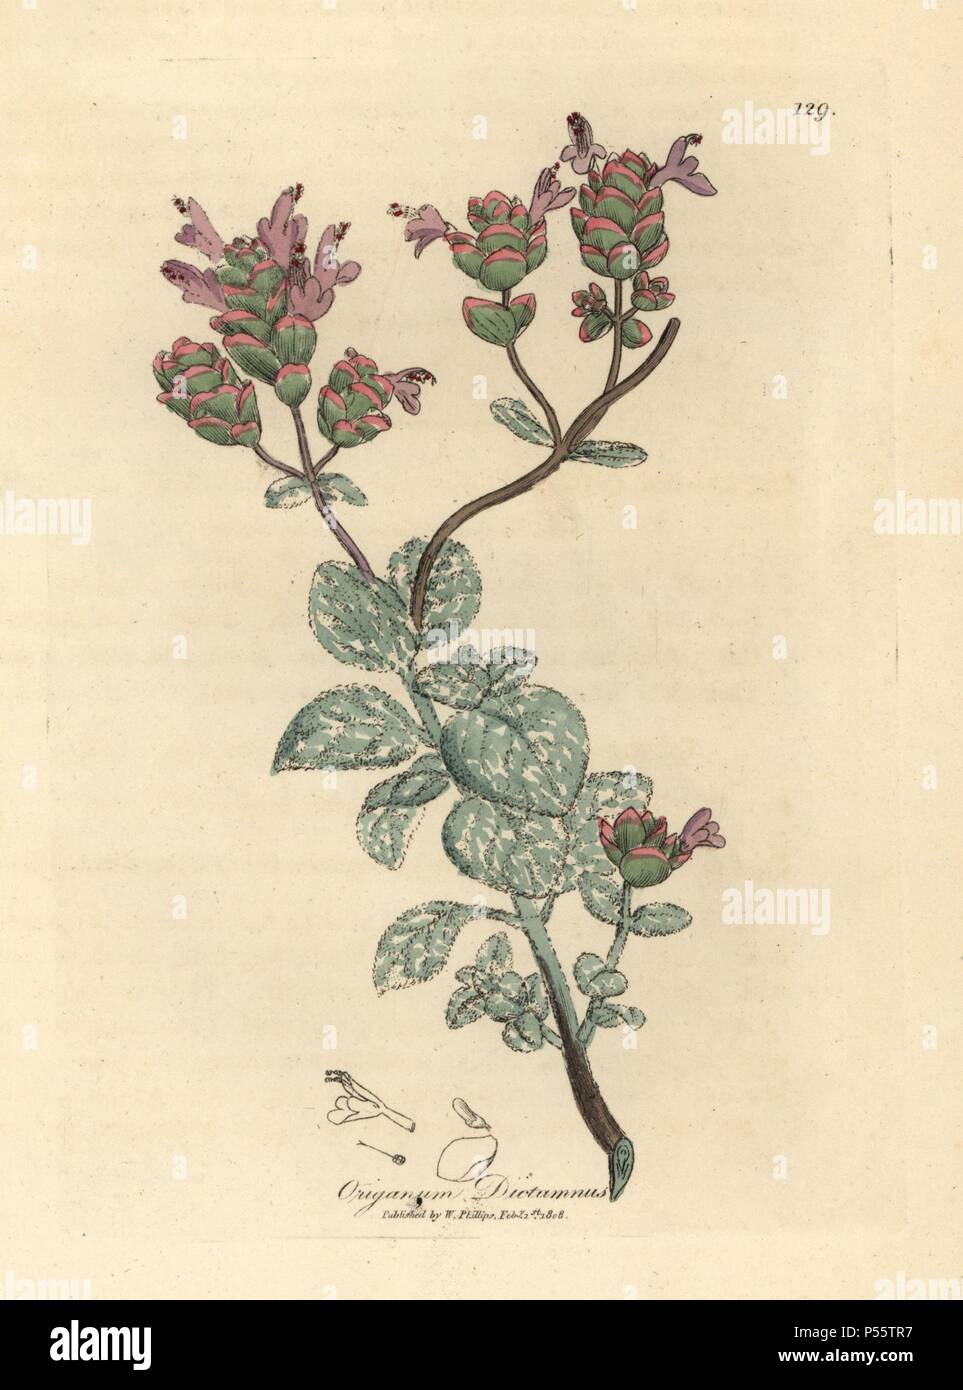 Lilac flowered dittany of Crete, Origanum dictamnus. Handcolored copperplate engraving from a botanical illustration by James Sowerby from William Woodville and Sir William Jackson Hooker's 'Medical Botany' 1832. The tireless Sowerby (1757-1822) drew over 2,500 plants for Smith's mammoth 'English Botany' (1790-1814) and 440 mushrooms for 'Coloured Figures of English Fungi ' (1797) among many other works. Stock Photo